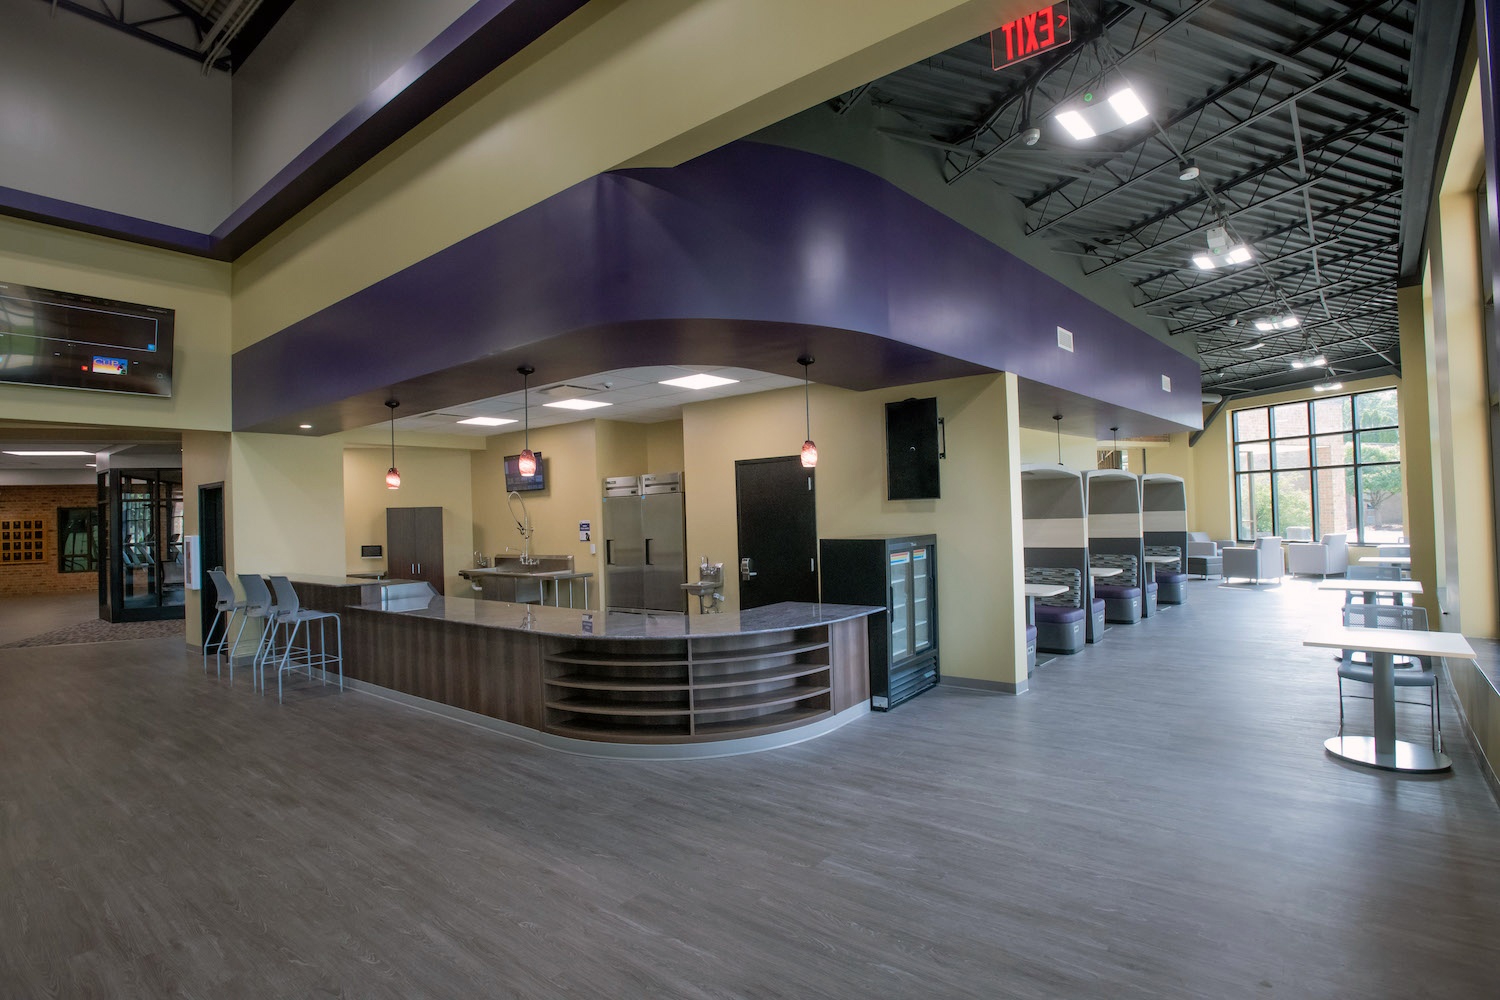 The smoothie bar and study areas inside the completed Dow Recreation and Wellness Center